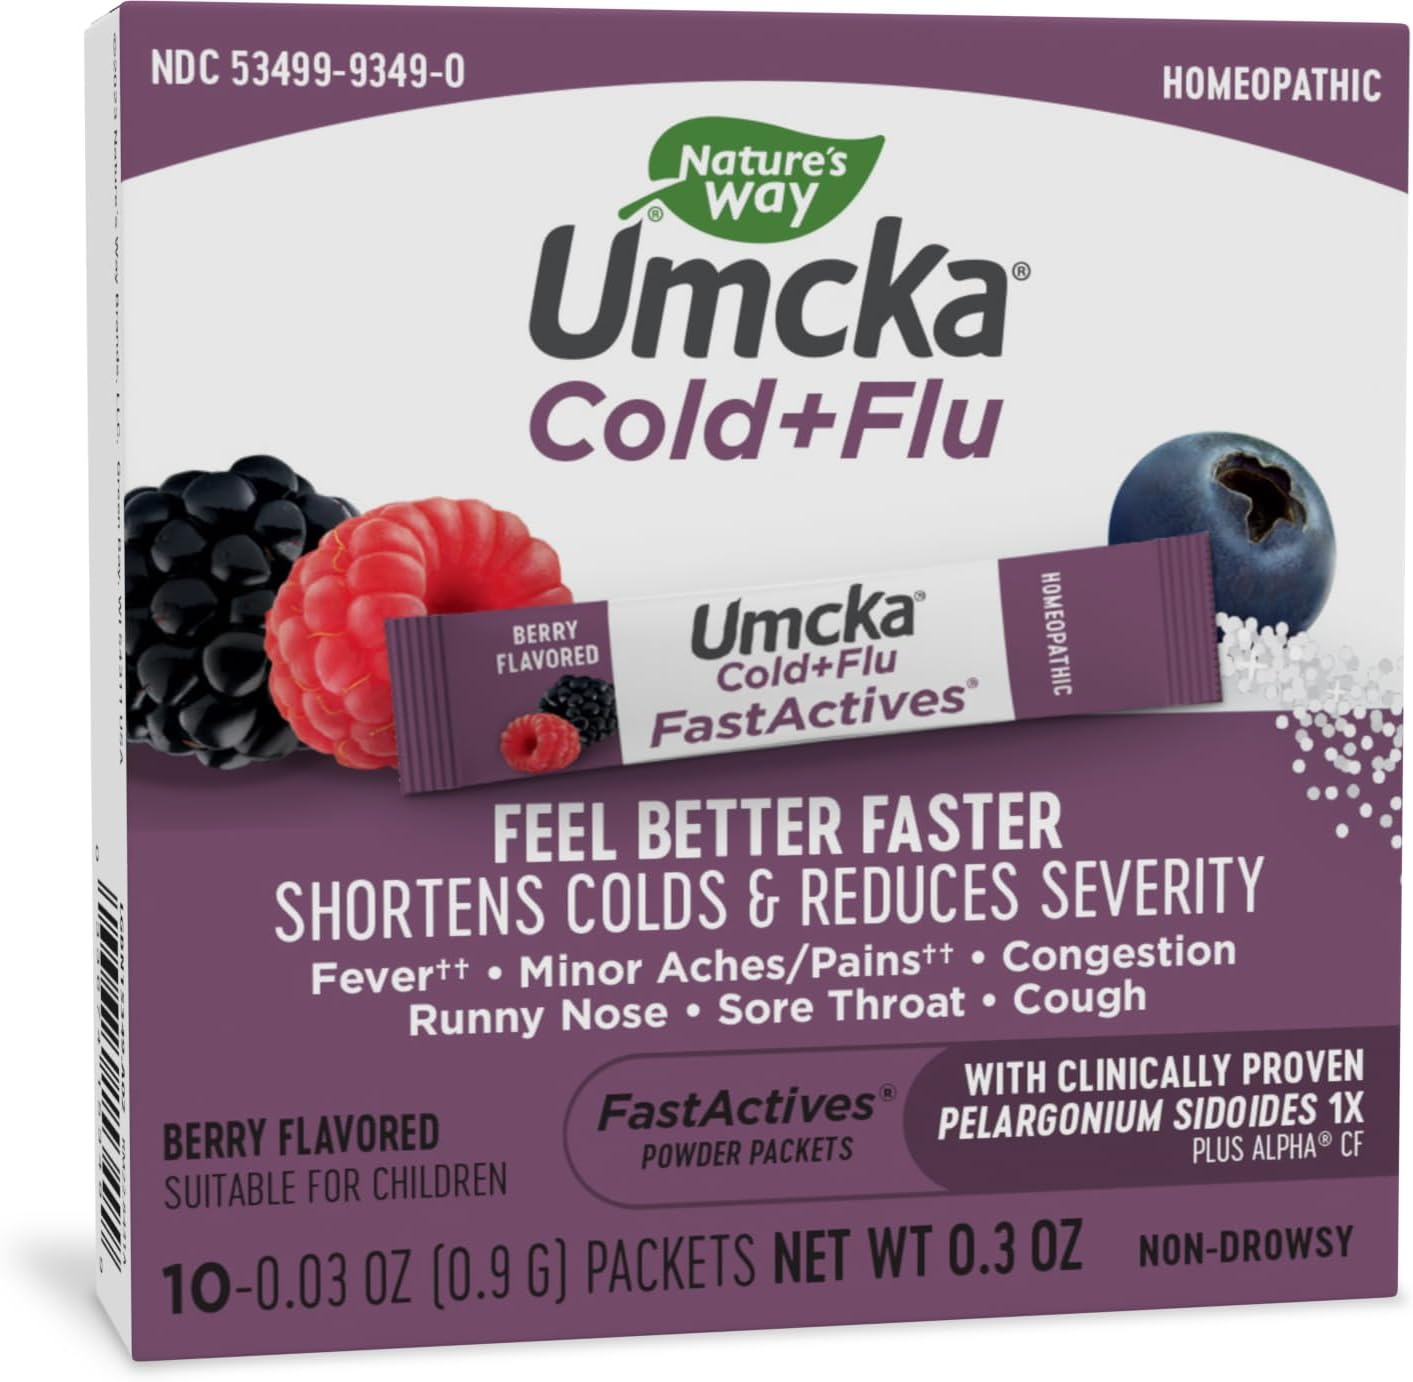 Natures Way Umcka Cold+Flu FastActives Homeopathic, Fever**, Sore Throat, Cough, Congestion, Minor A